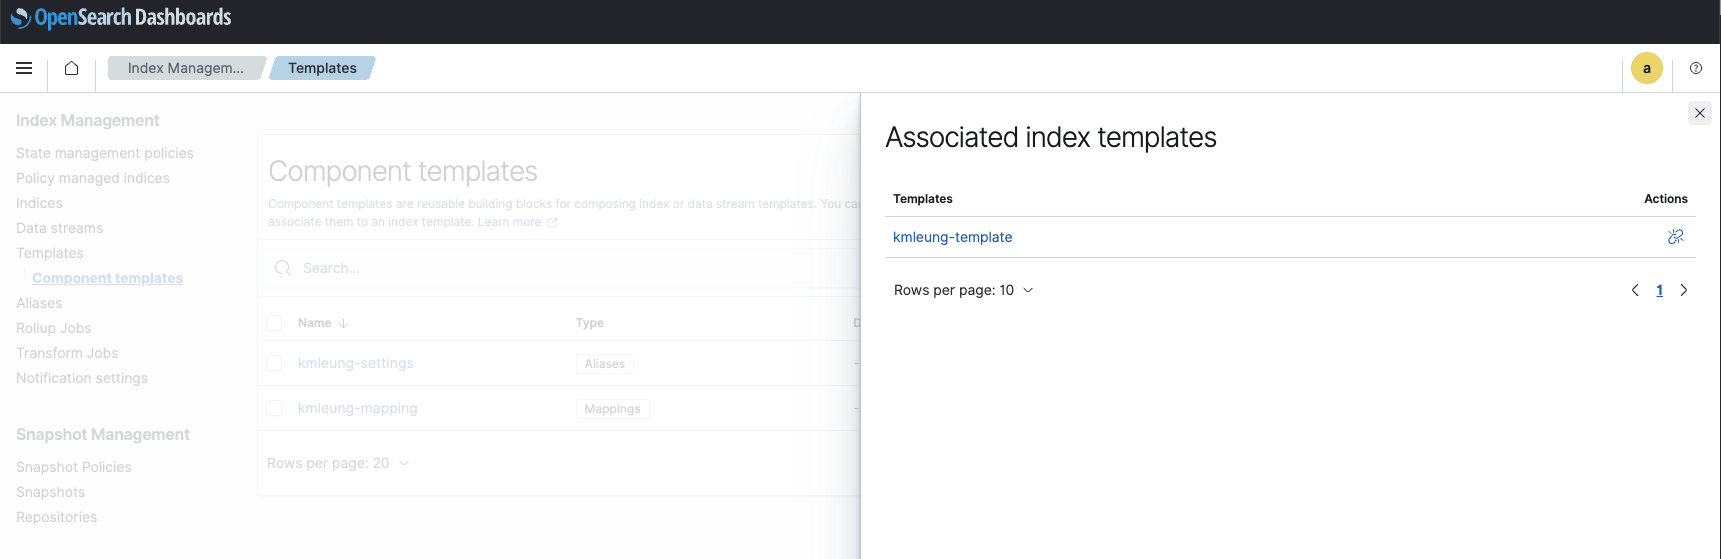 Aggregated view to help admin better manage index templates with component templates